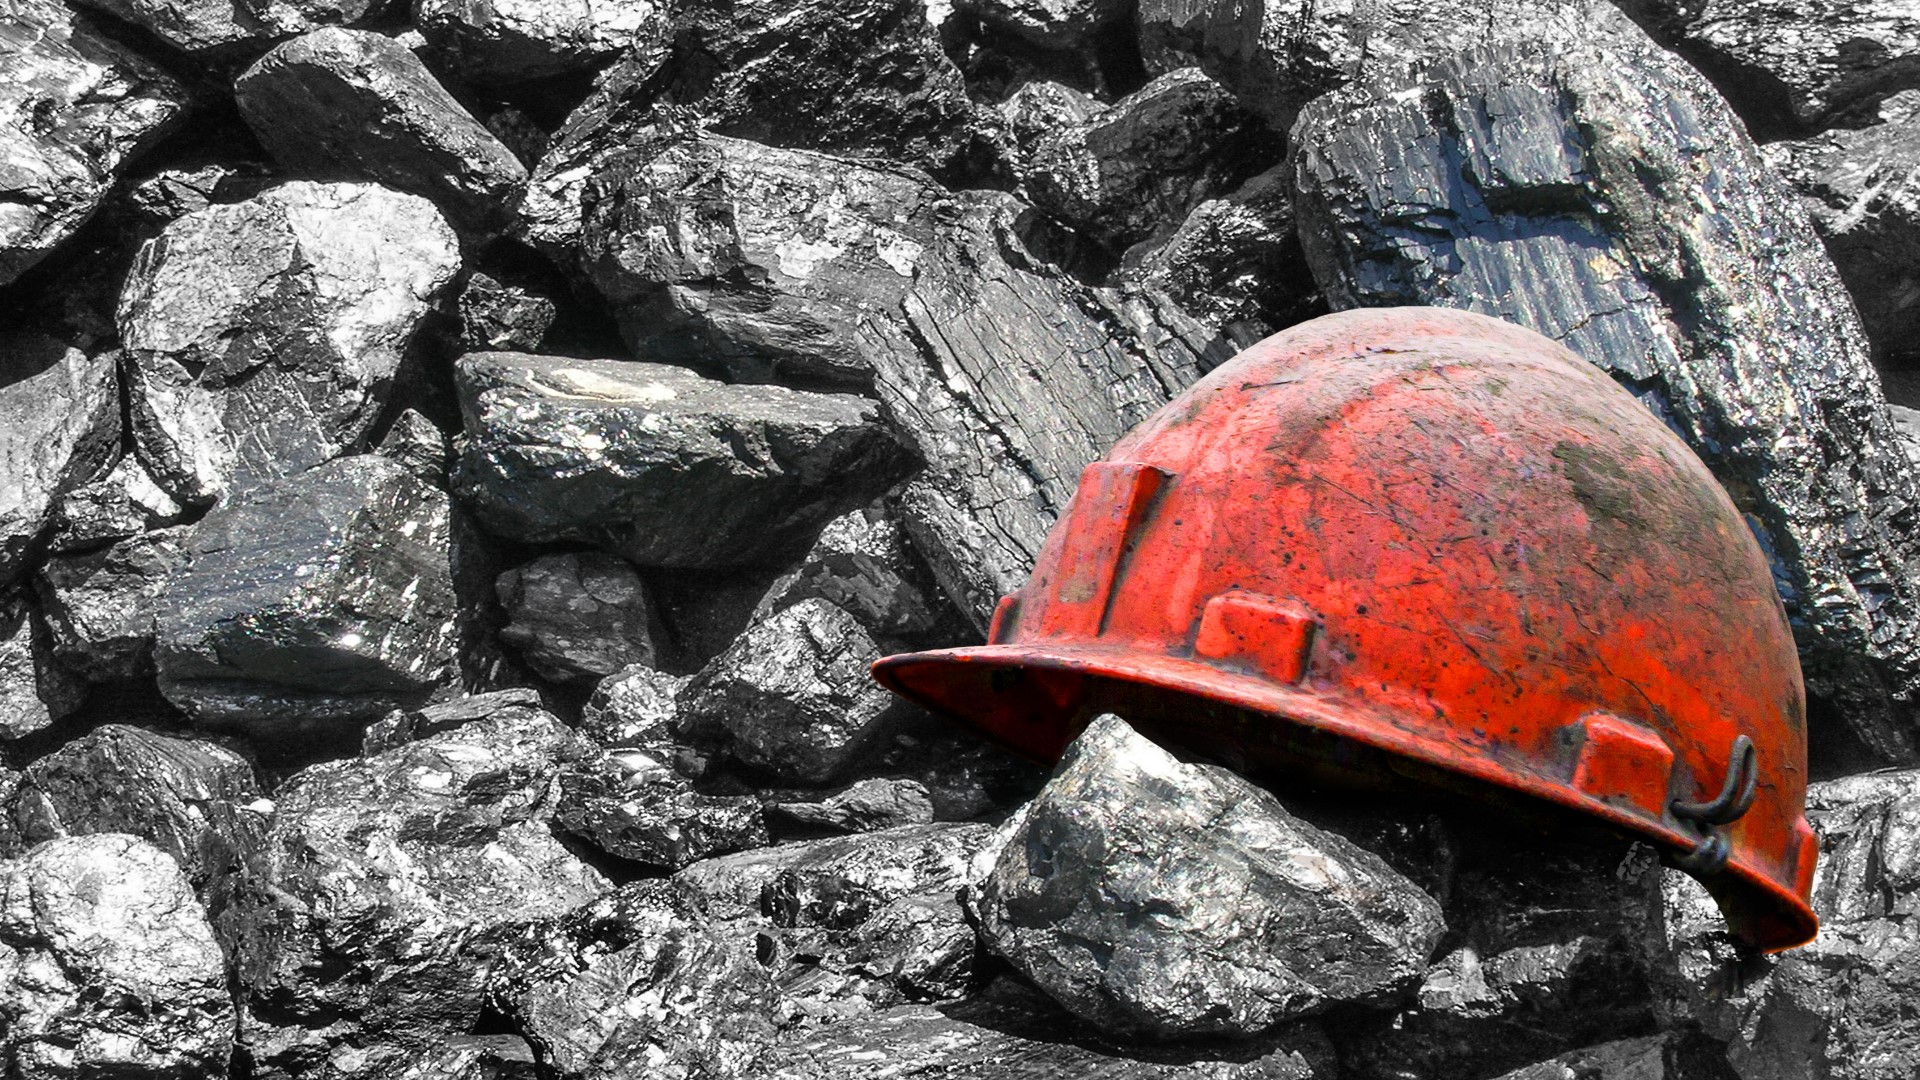 U.S. records 24 mining deaths in 2019, 11 in coal mines